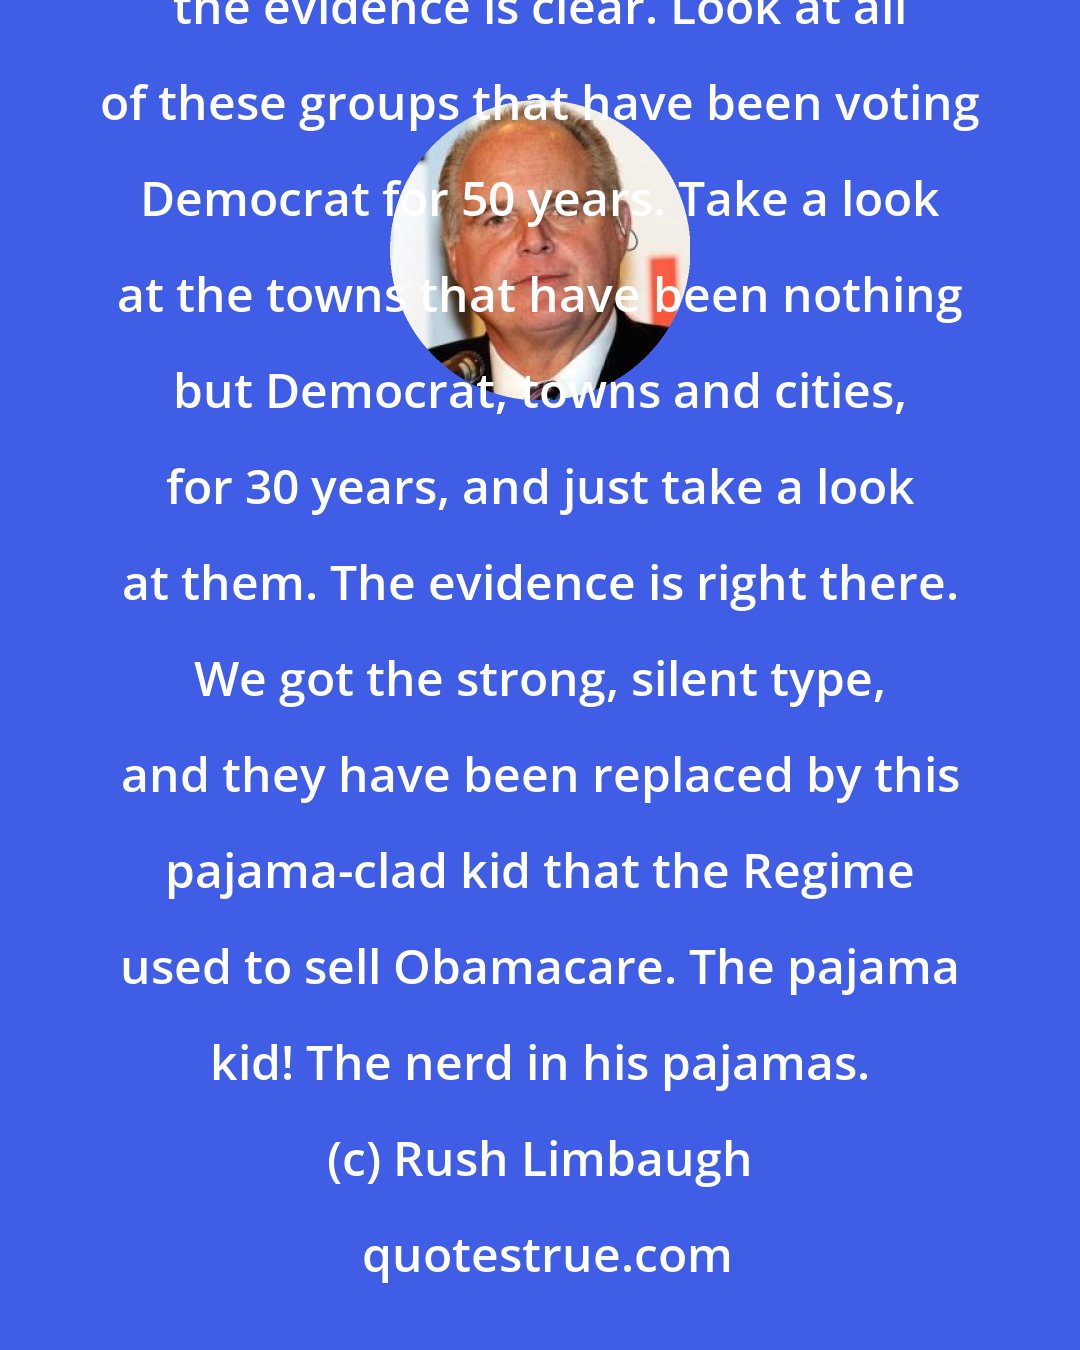 Rush Limbaugh: The worst thing you can do is to turn over your life to a political party that simply is going to use you. And the evidence is clear. Look at all of these groups that have been voting Democrat for 50 years. Take a look at the towns that have been nothing but Democrat, towns and cities, for 30 years, and just take a look at them. The evidence is right there. We got the strong, silent type, and they have been replaced by this pajama-clad kid that the Regime used to sell Obamacare. The pajama kid! The nerd in his pajamas.